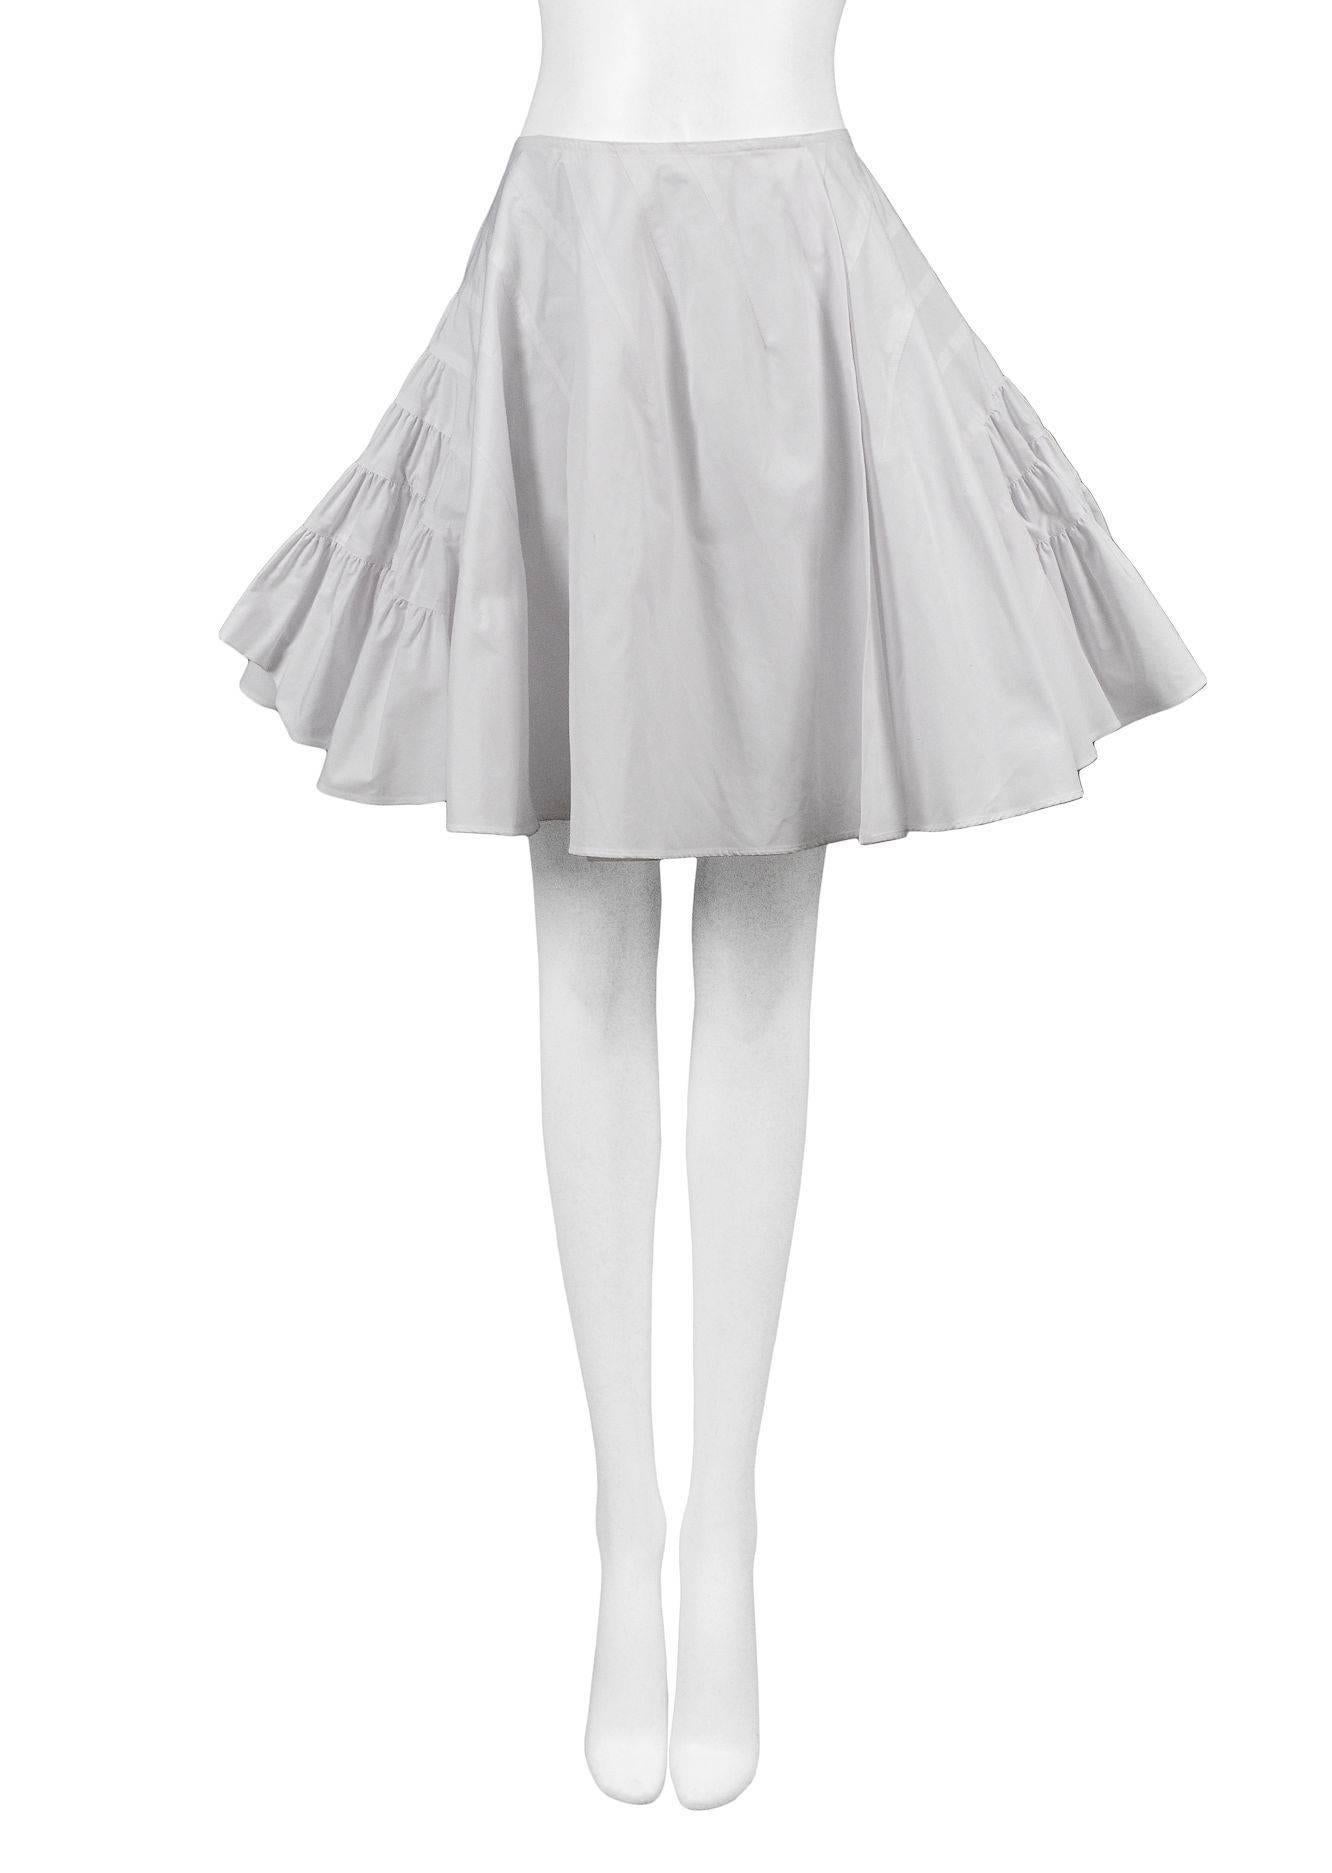 Alaia white multi tier skirt with curved seams.